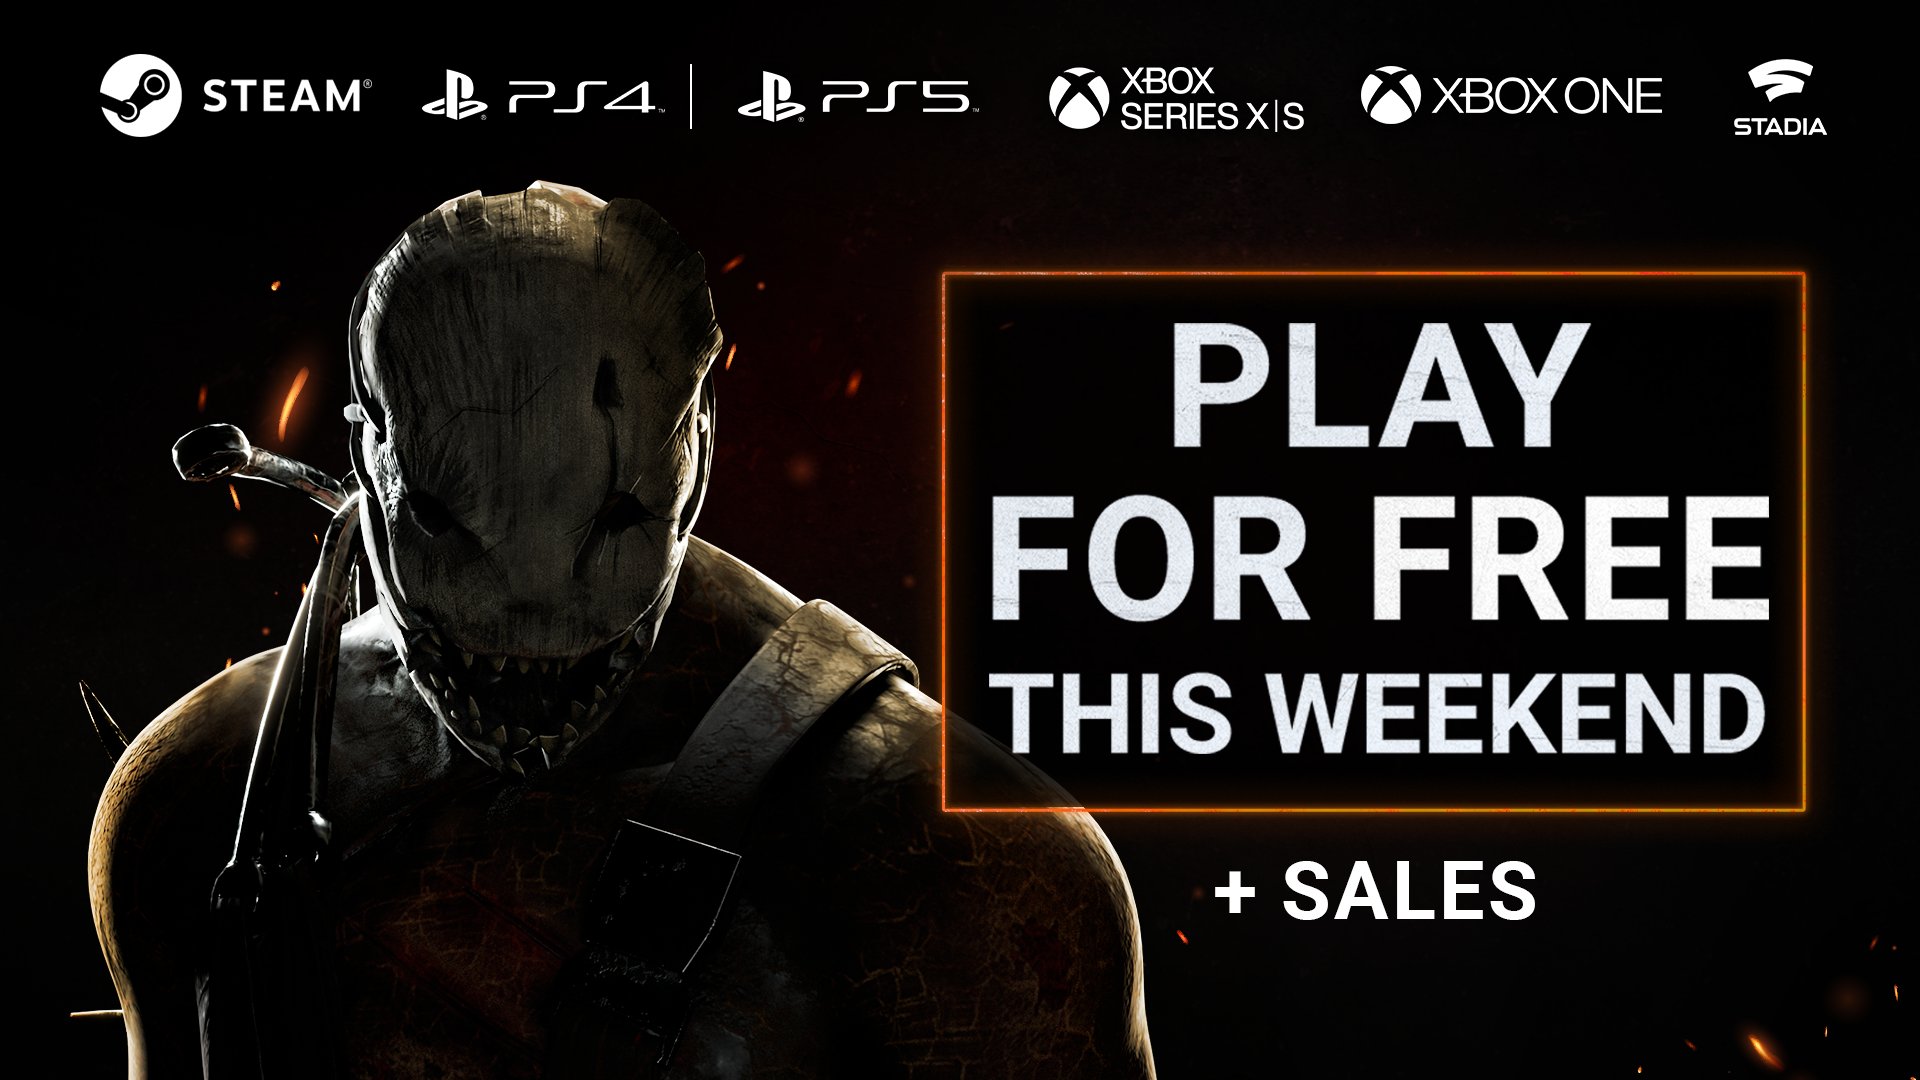 Dead by Daylight - Dead by Daylight - FREE TO PLAY WEEKEND! - Steam News